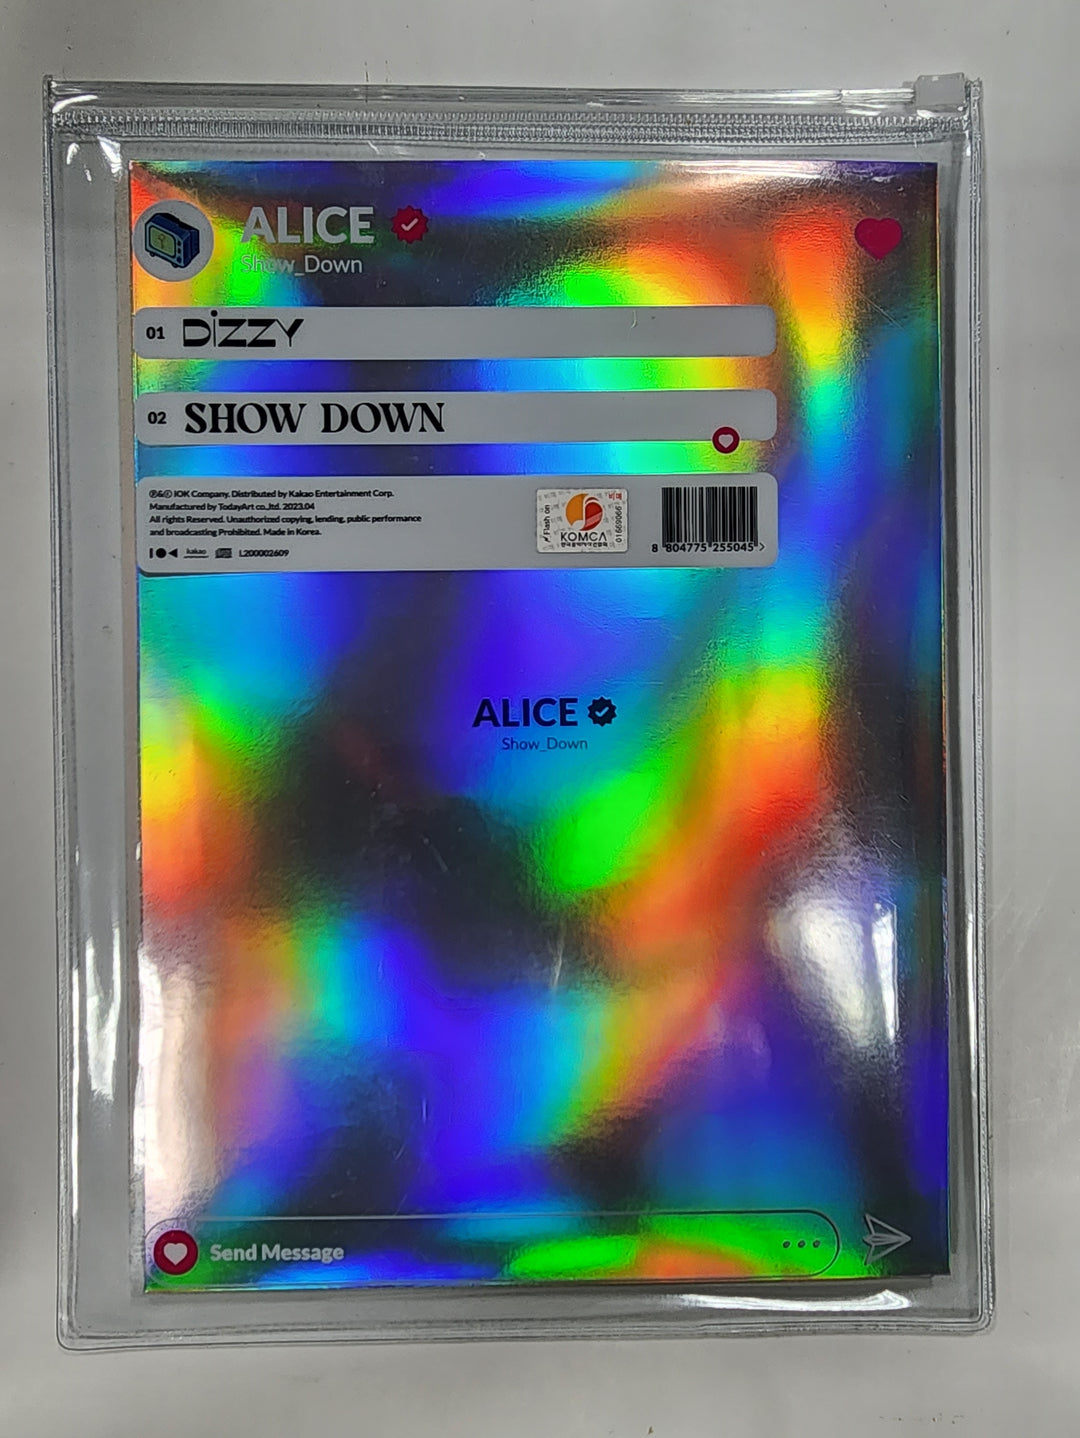 ALICE "SHOW DOWN" - Hand Autographed(Signed) Promo Album